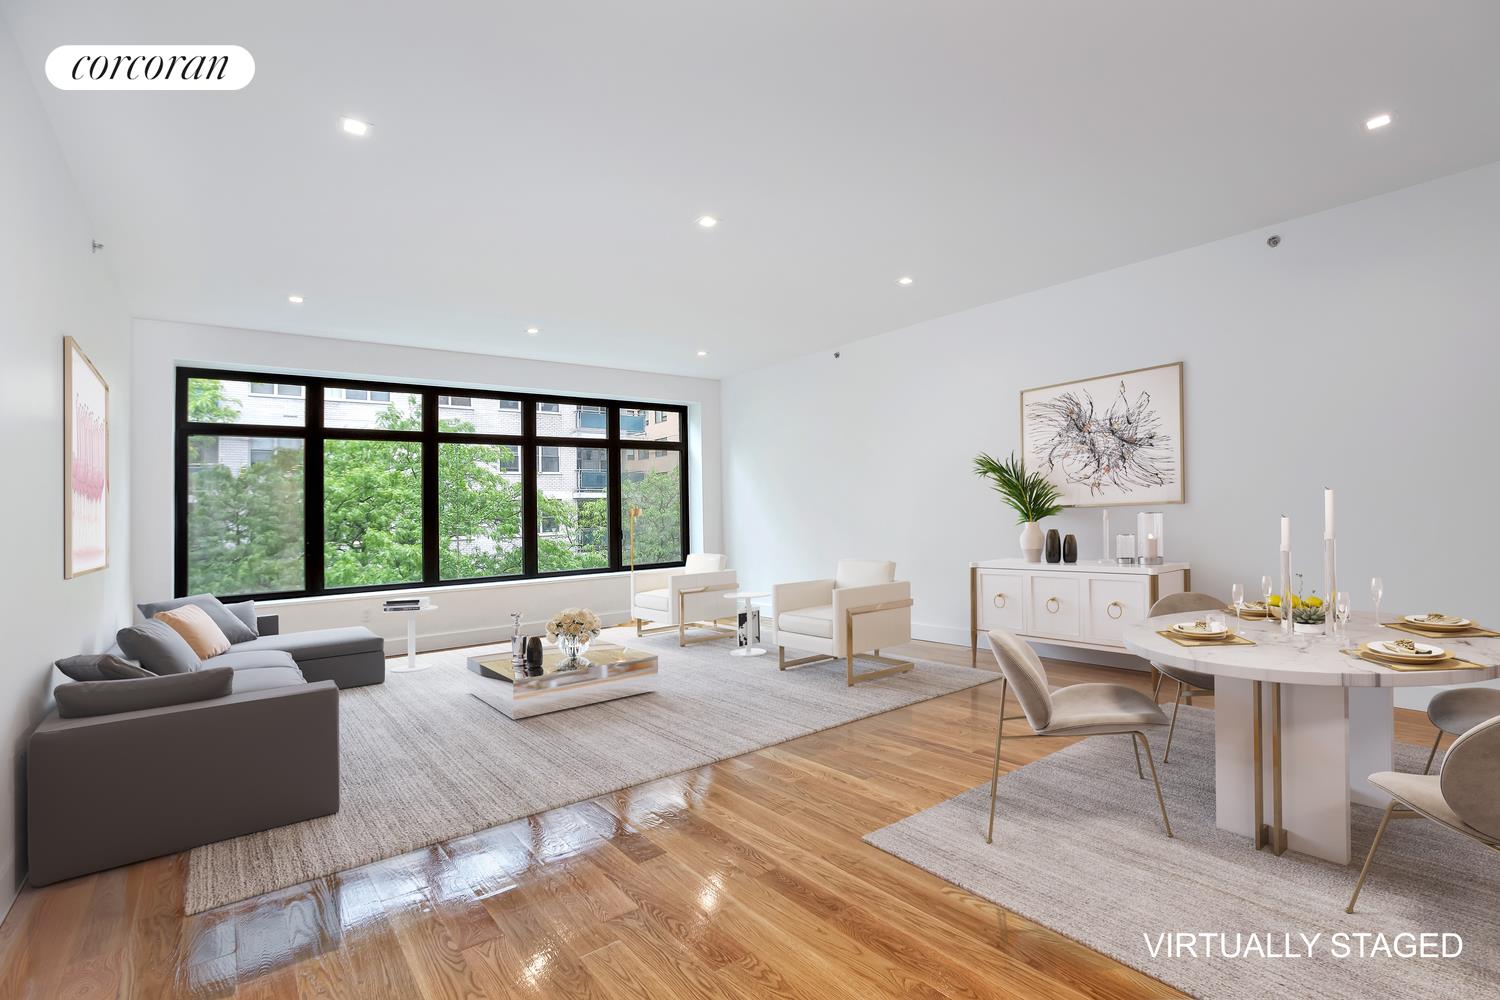 223 East 80th Street 3, Yorkville, Upper East Side, NYC - 3 Bedrooms  
3 Bathrooms  
4 Rooms - 